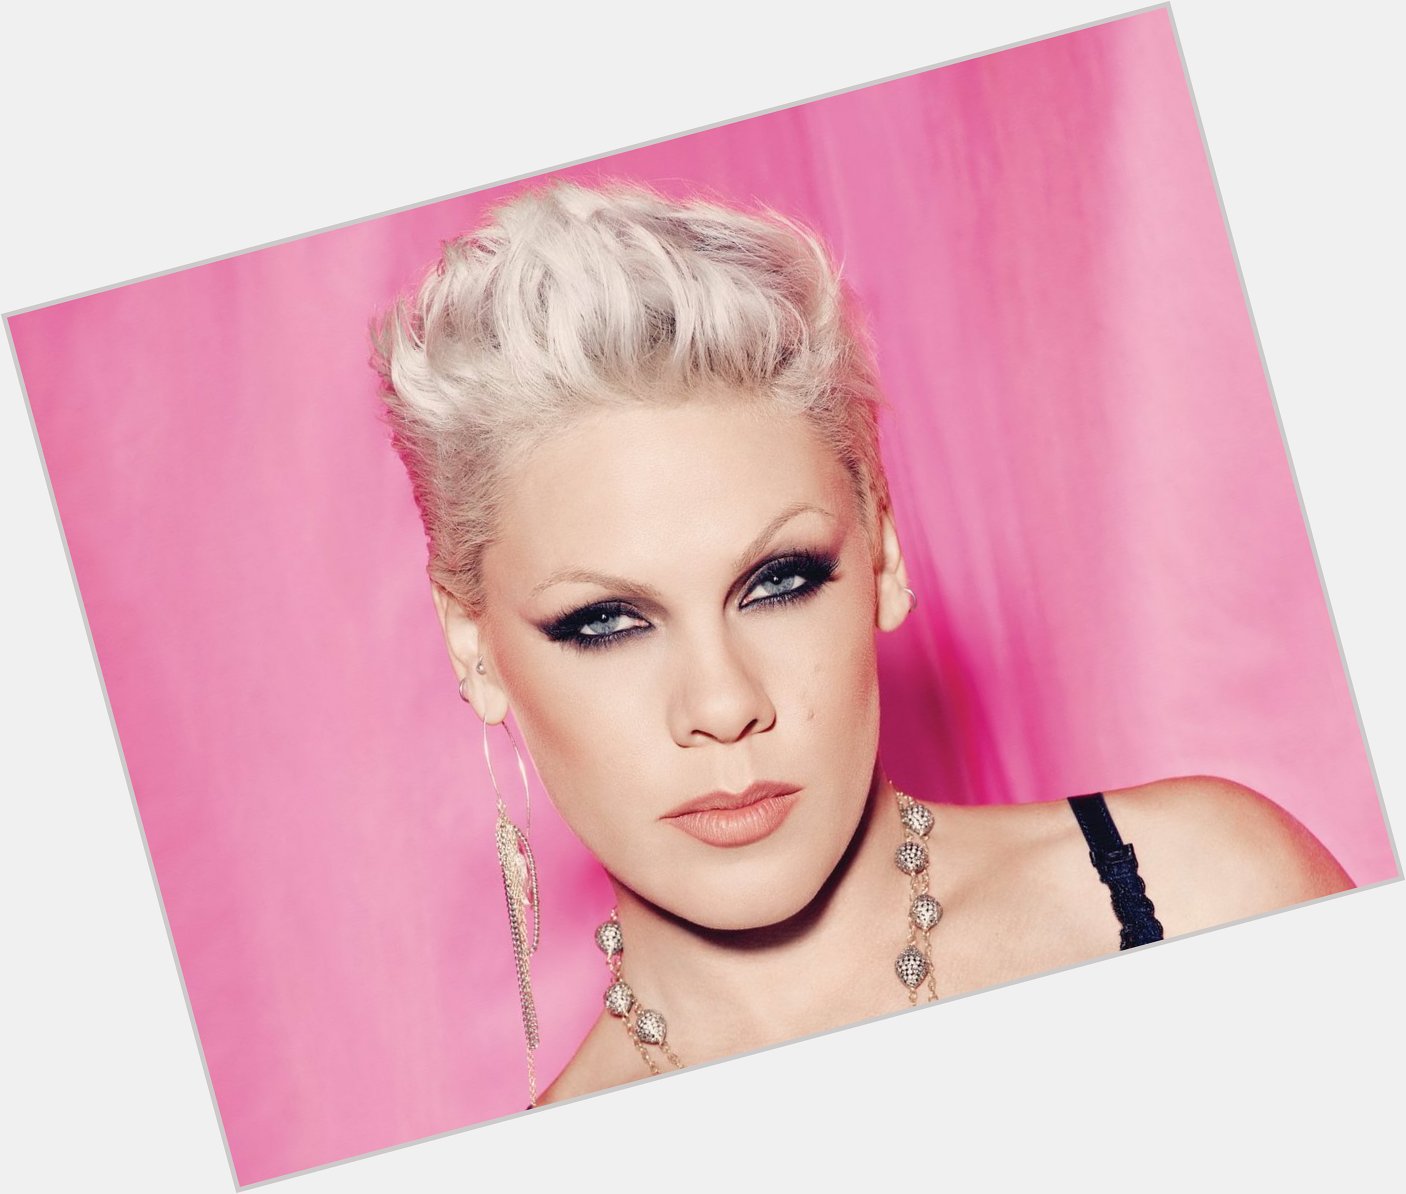 Happy birthday to one of my personal style icons, P!nk!    